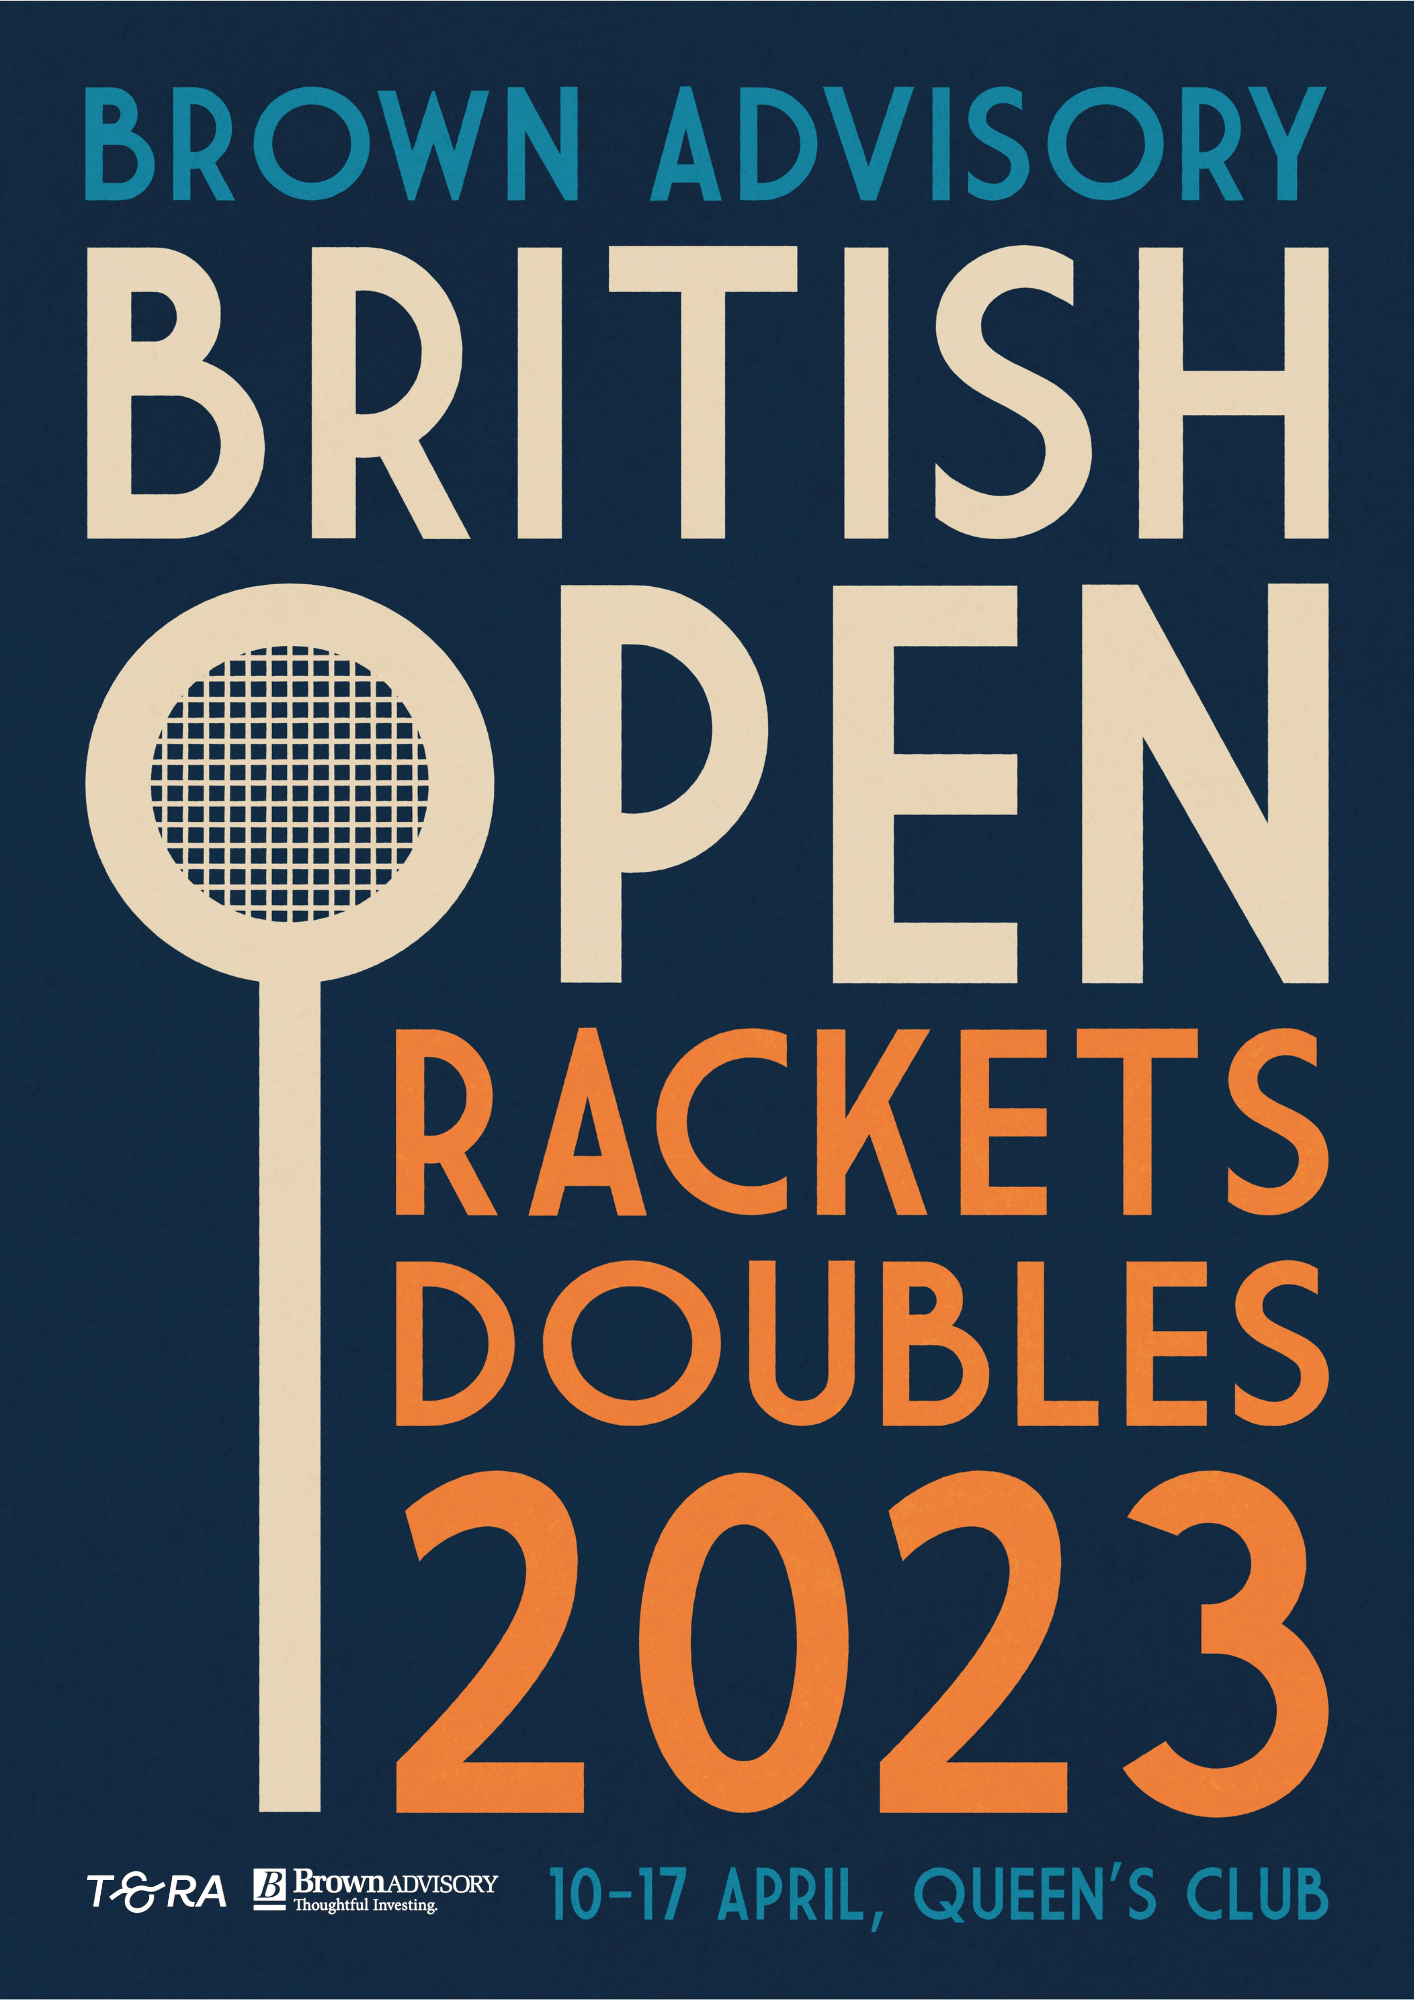 Brown Advisory British Open Doubles Rackets